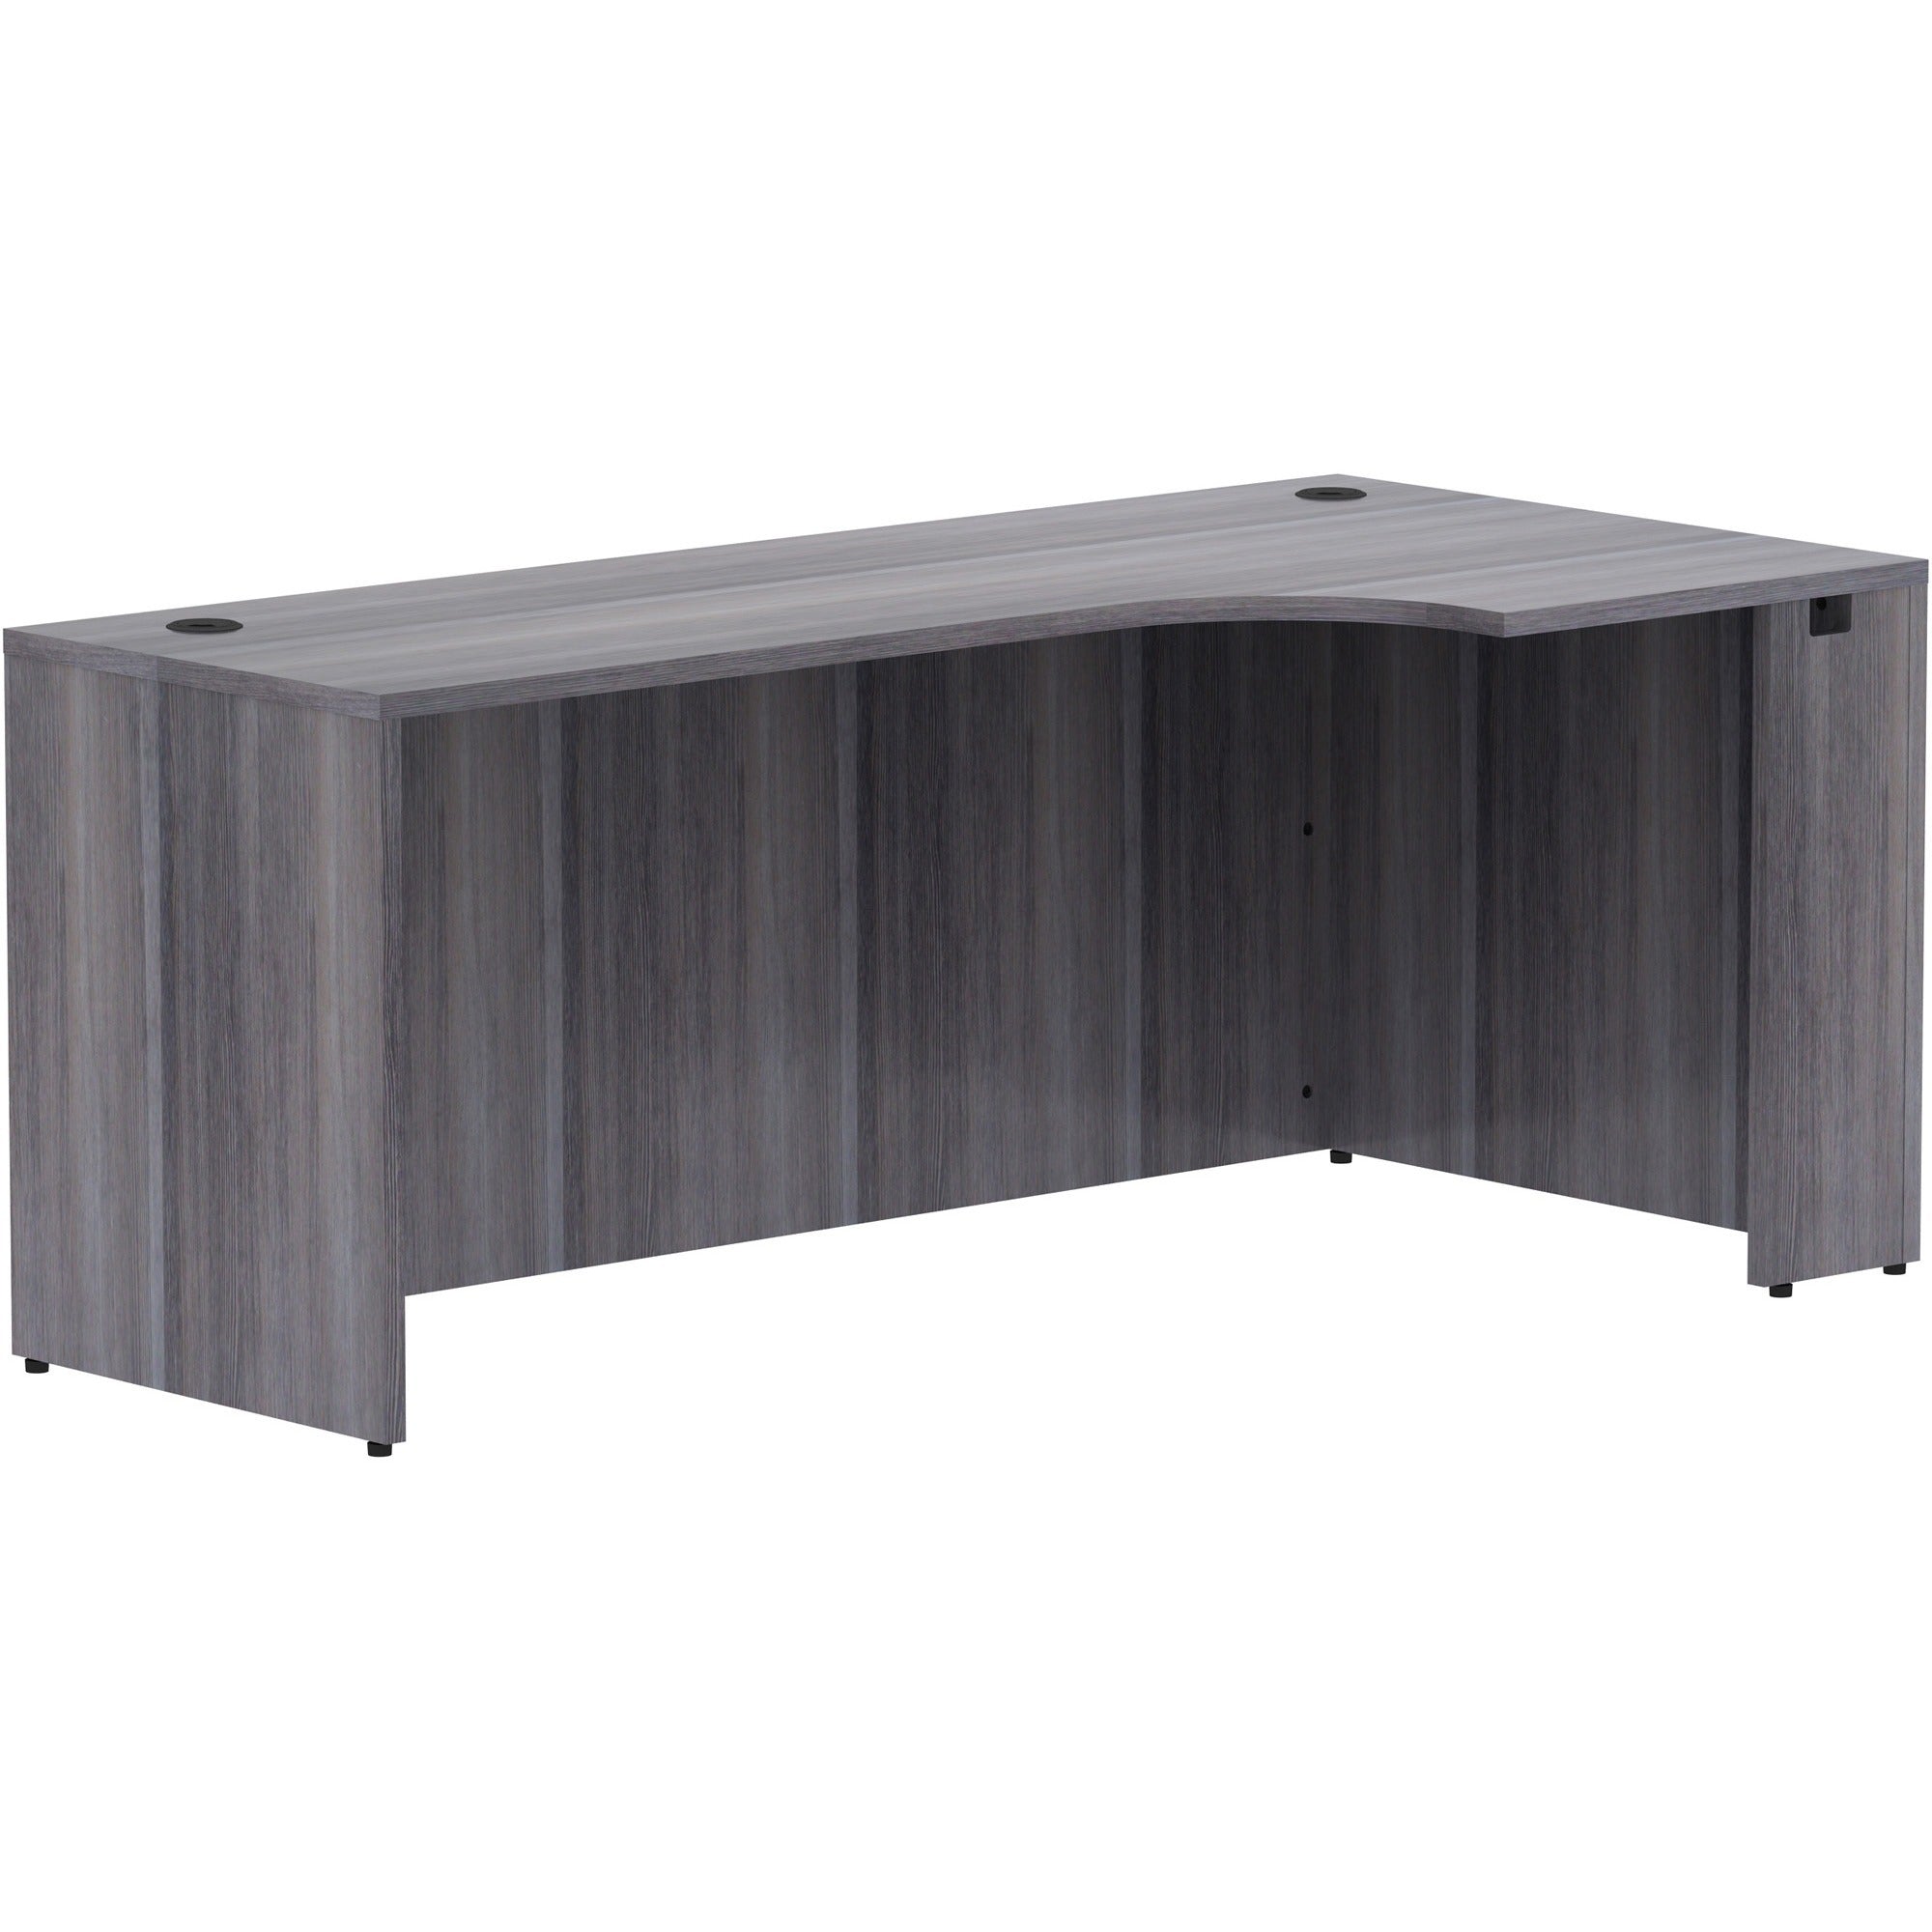 lorell-essentials-seriese-right-corner-credenza-72-x-36-x-24295-credenza-1-top-finish-weathered-charcoal-laminate_llr69599 - 1